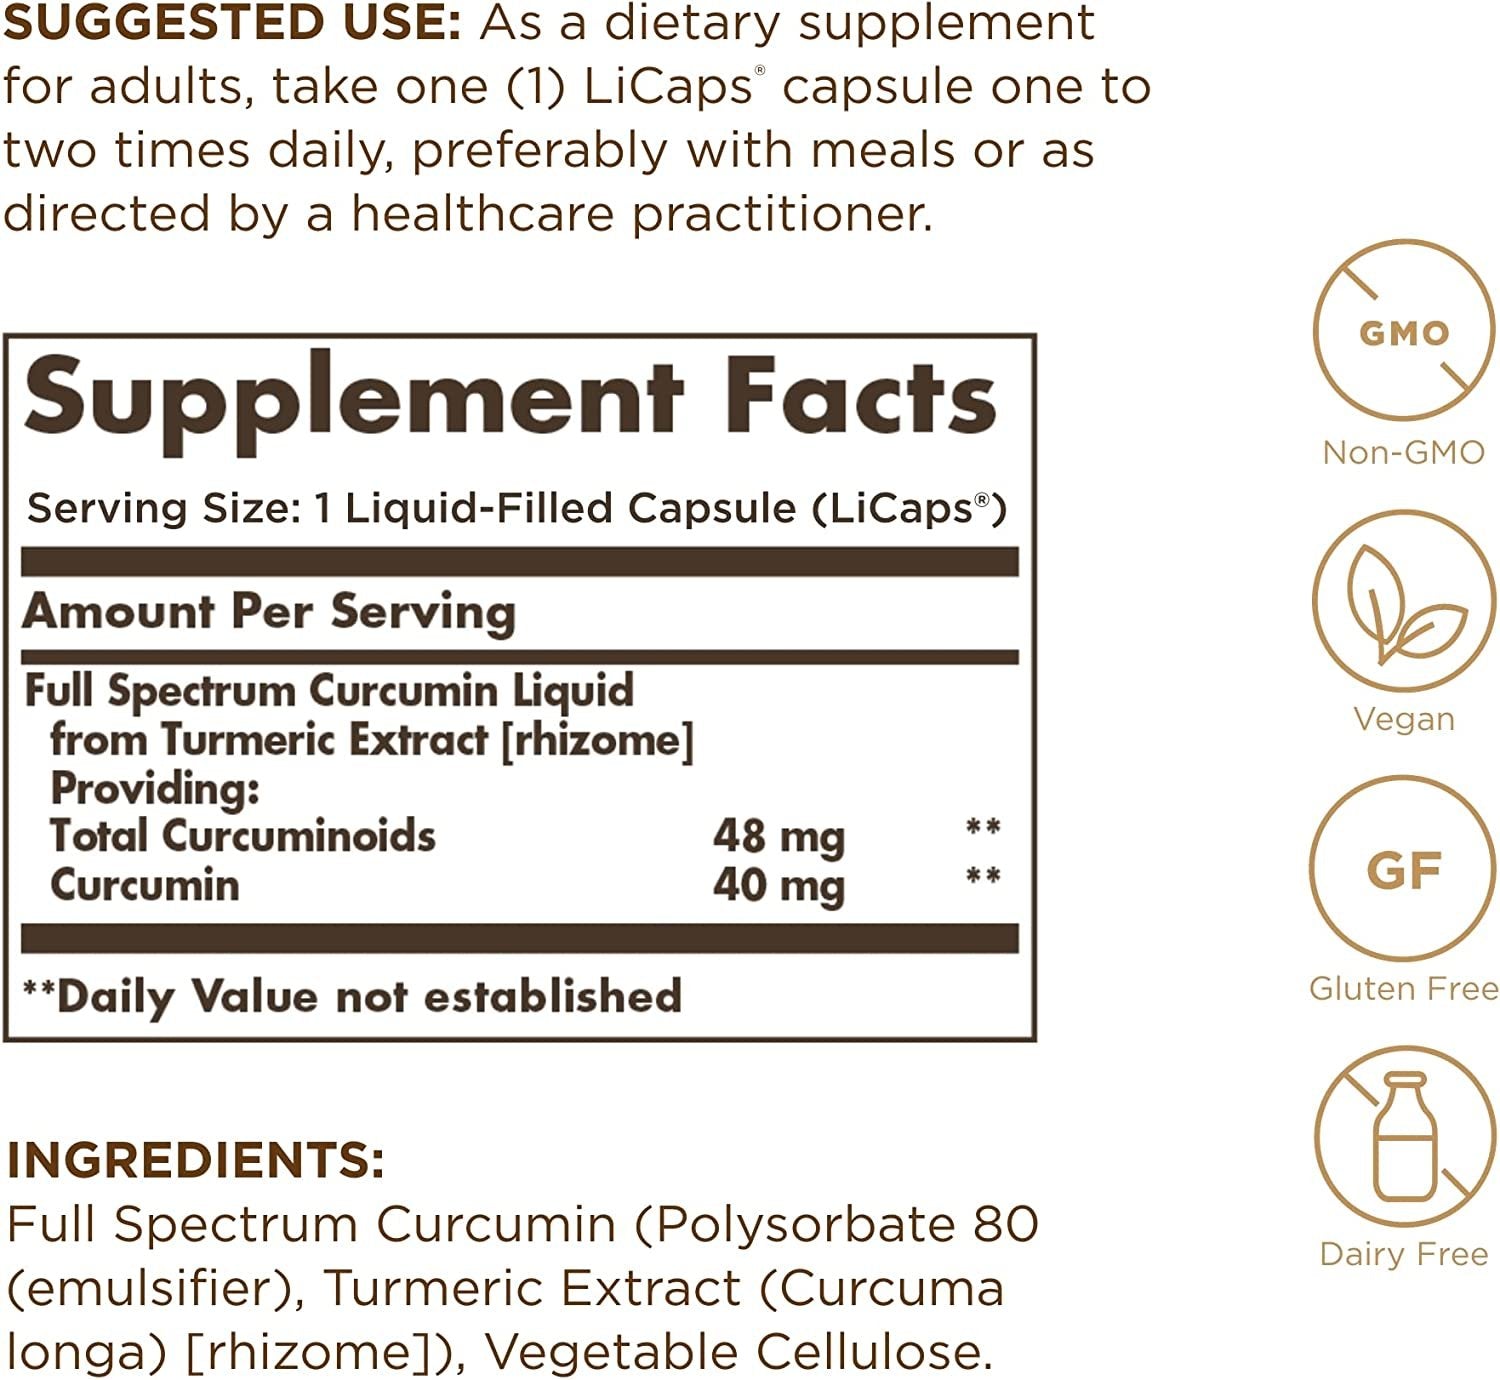 Solgar Full Spectrum Curcumin Liquid Extract, 60 Softgels - 3 Pack - Faster Absorption - Brain, Joint & Immune Health - Long Lasting Support - Non GMO, Gluten Free, Dairy Free - 60 Servings Per Pack